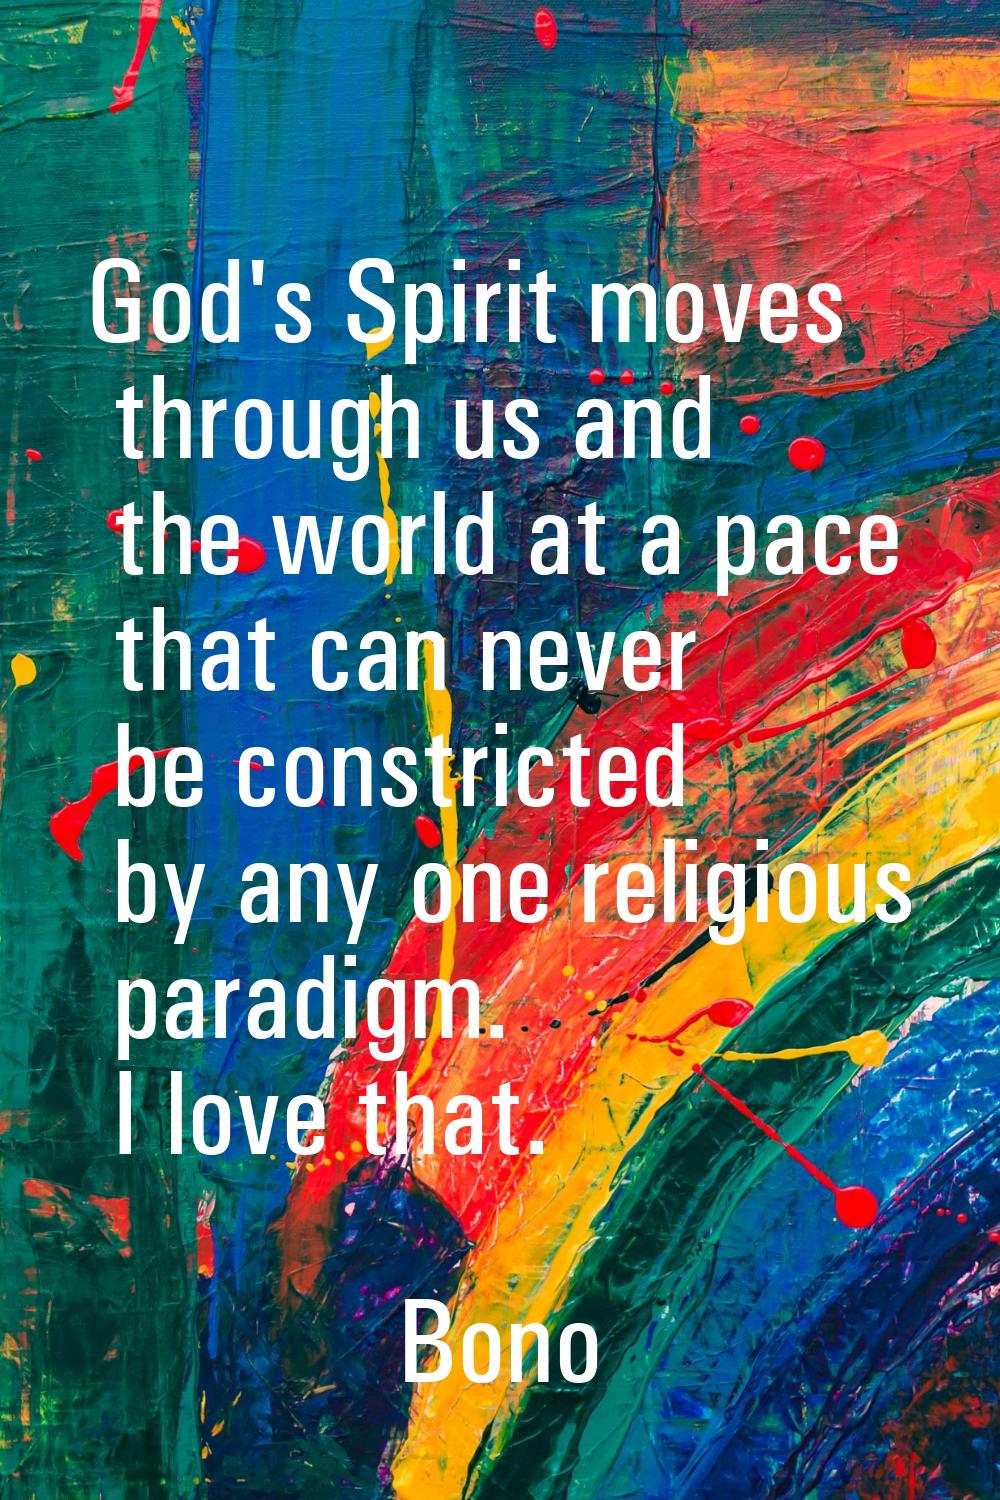 God's Spirit moves through us and the world at a pace that can never be constricted by any one reli